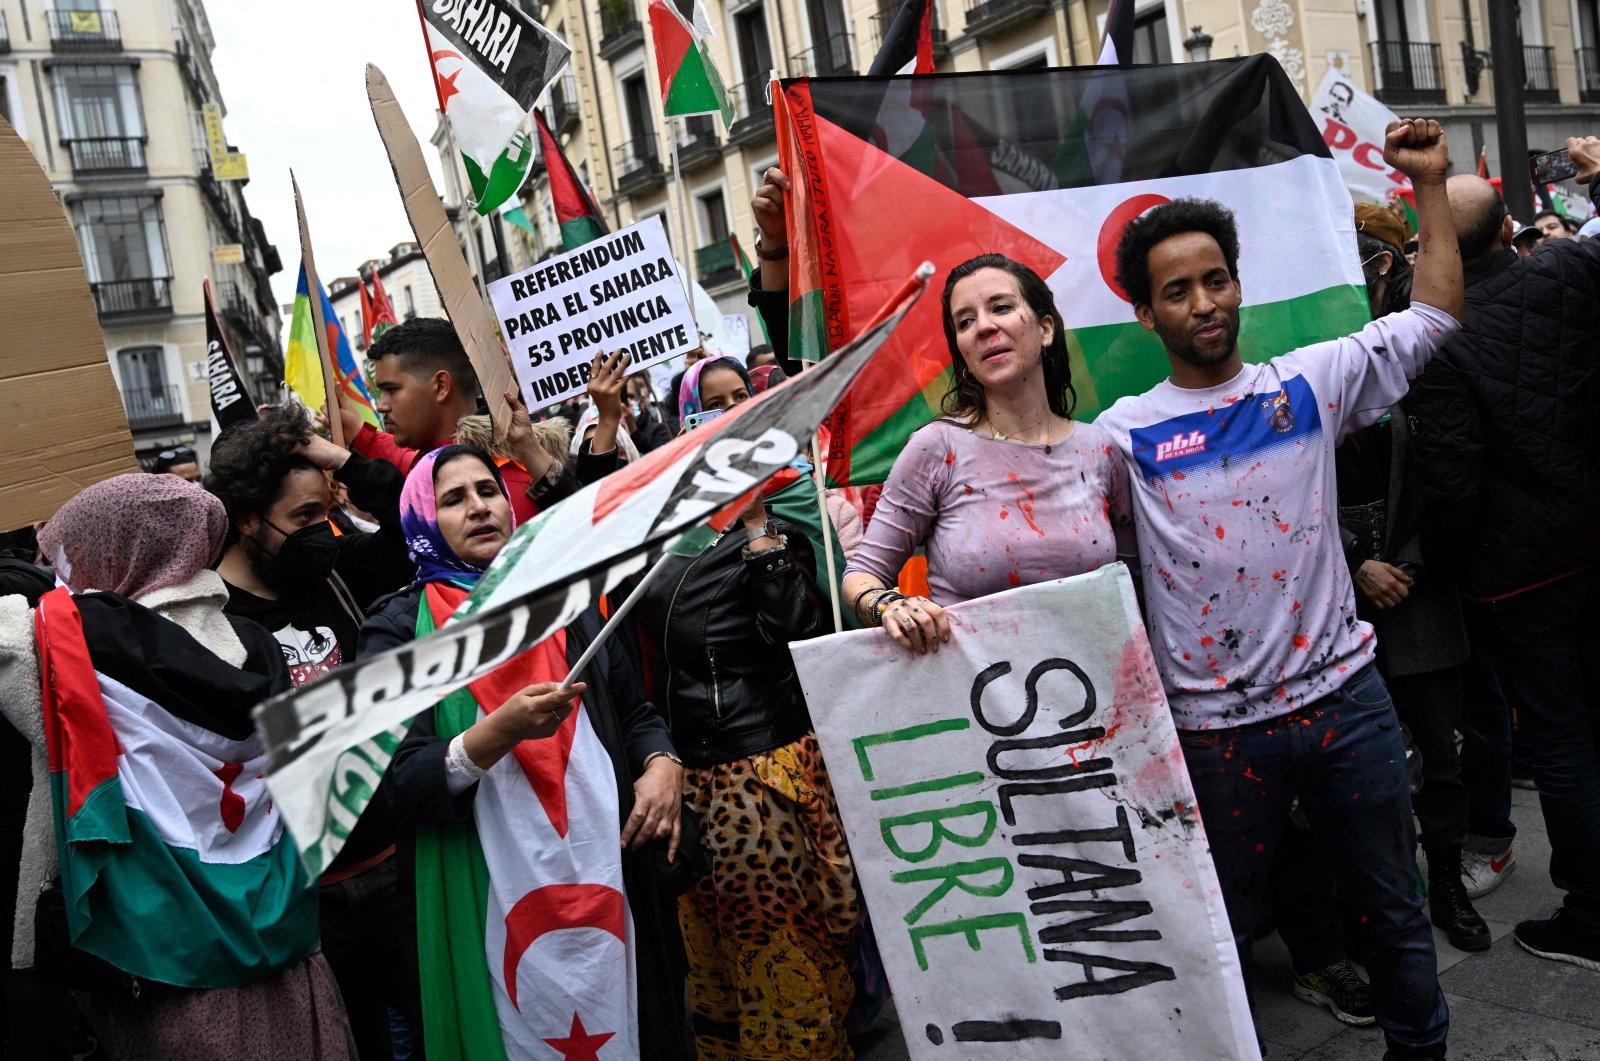 Demonstrators take part in a protest against the Spanish government&#039;s support for Morocco&#039;s autonomy plan for Western Sahara, in Madrid, Spain, March 26, 2022. (AFP Photo)